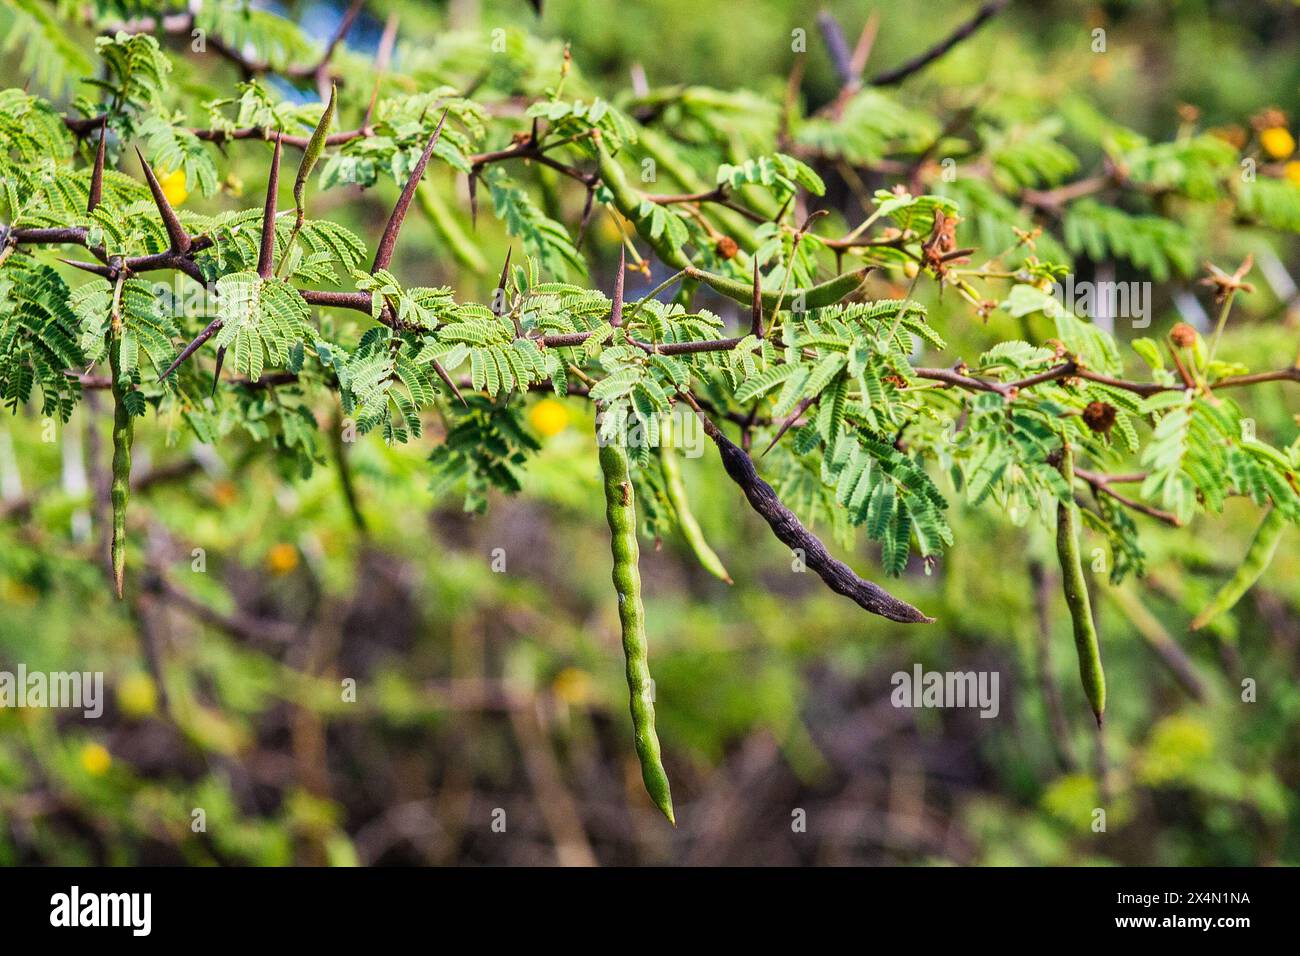 Acacia dealbata tree with fruits and leaves in the garden Stock Photo